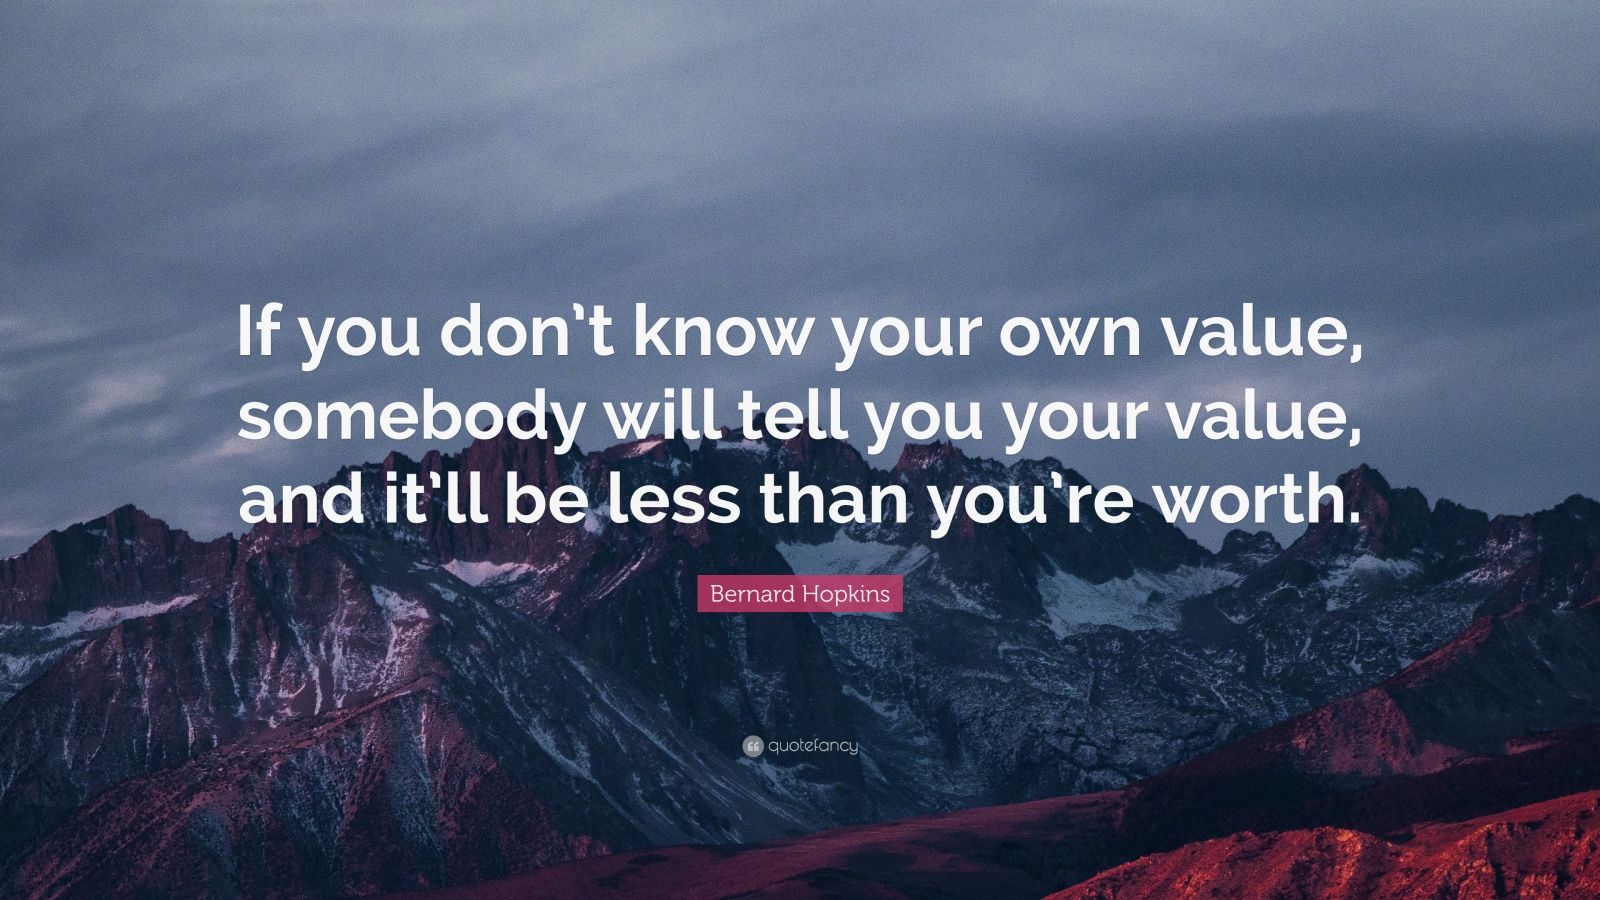 Bernard Hopkins Quote: “If you don’t know your own value, somebody will